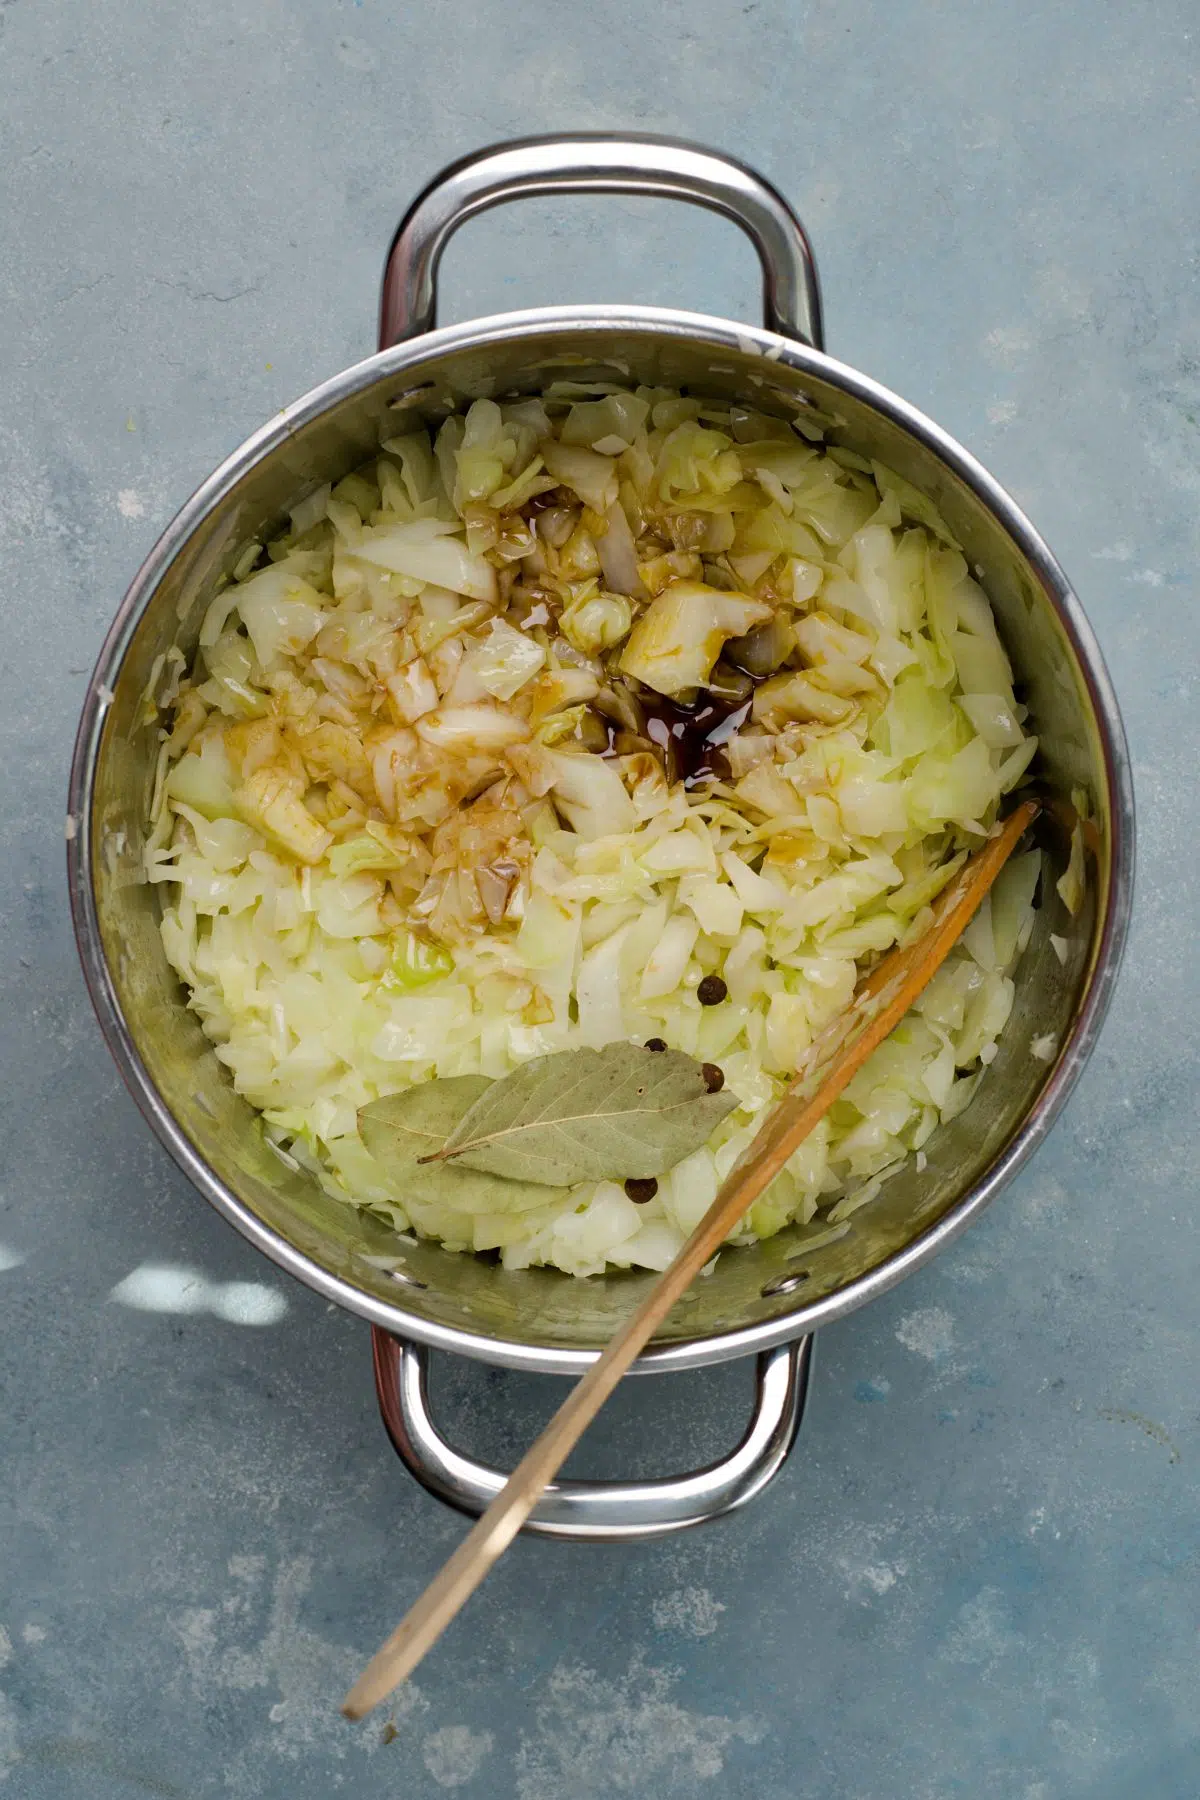 addiotional ingredients and spices on the fried cabbage. 